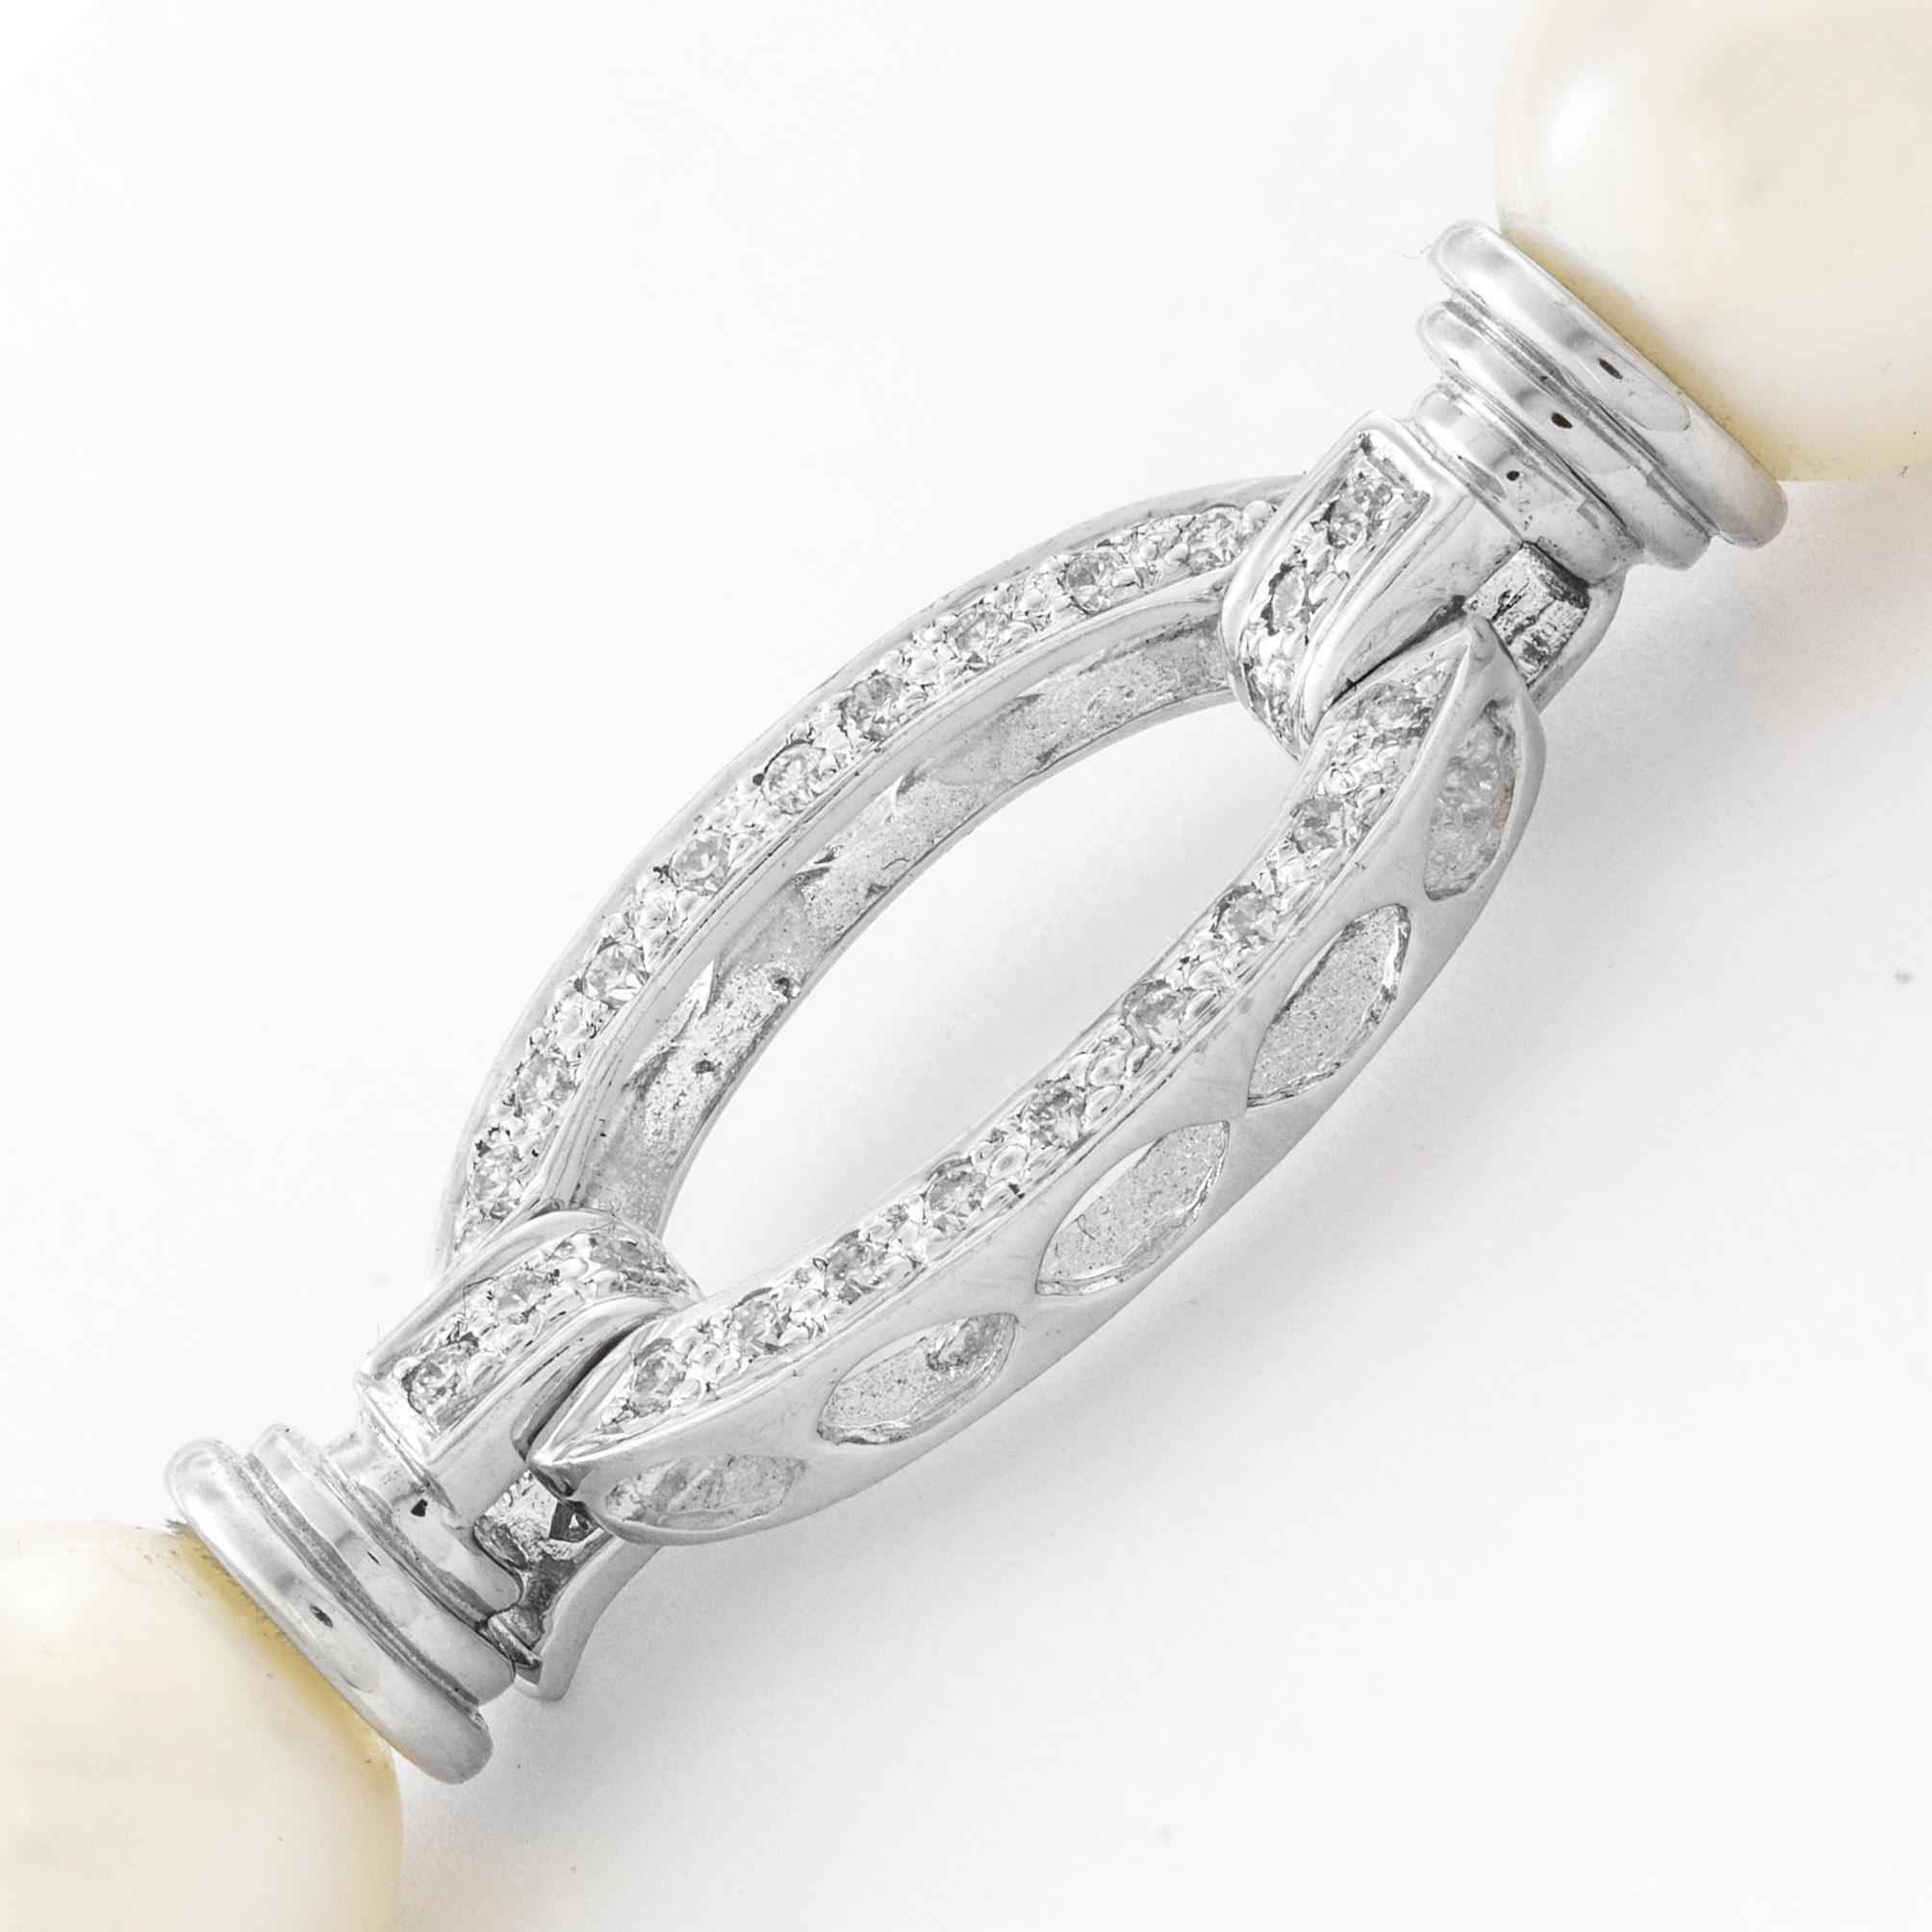 An 18 carat diamond-set oval frame clasp, set on one side with round brilliant-cut diamonds weighing 0.22 carats, all in 18 carat white gold, hallmarked 18ct gold,  London, bearing  the 'MGD' sponsor mark, measuring approximately 2.3 x 1.1cm.

This